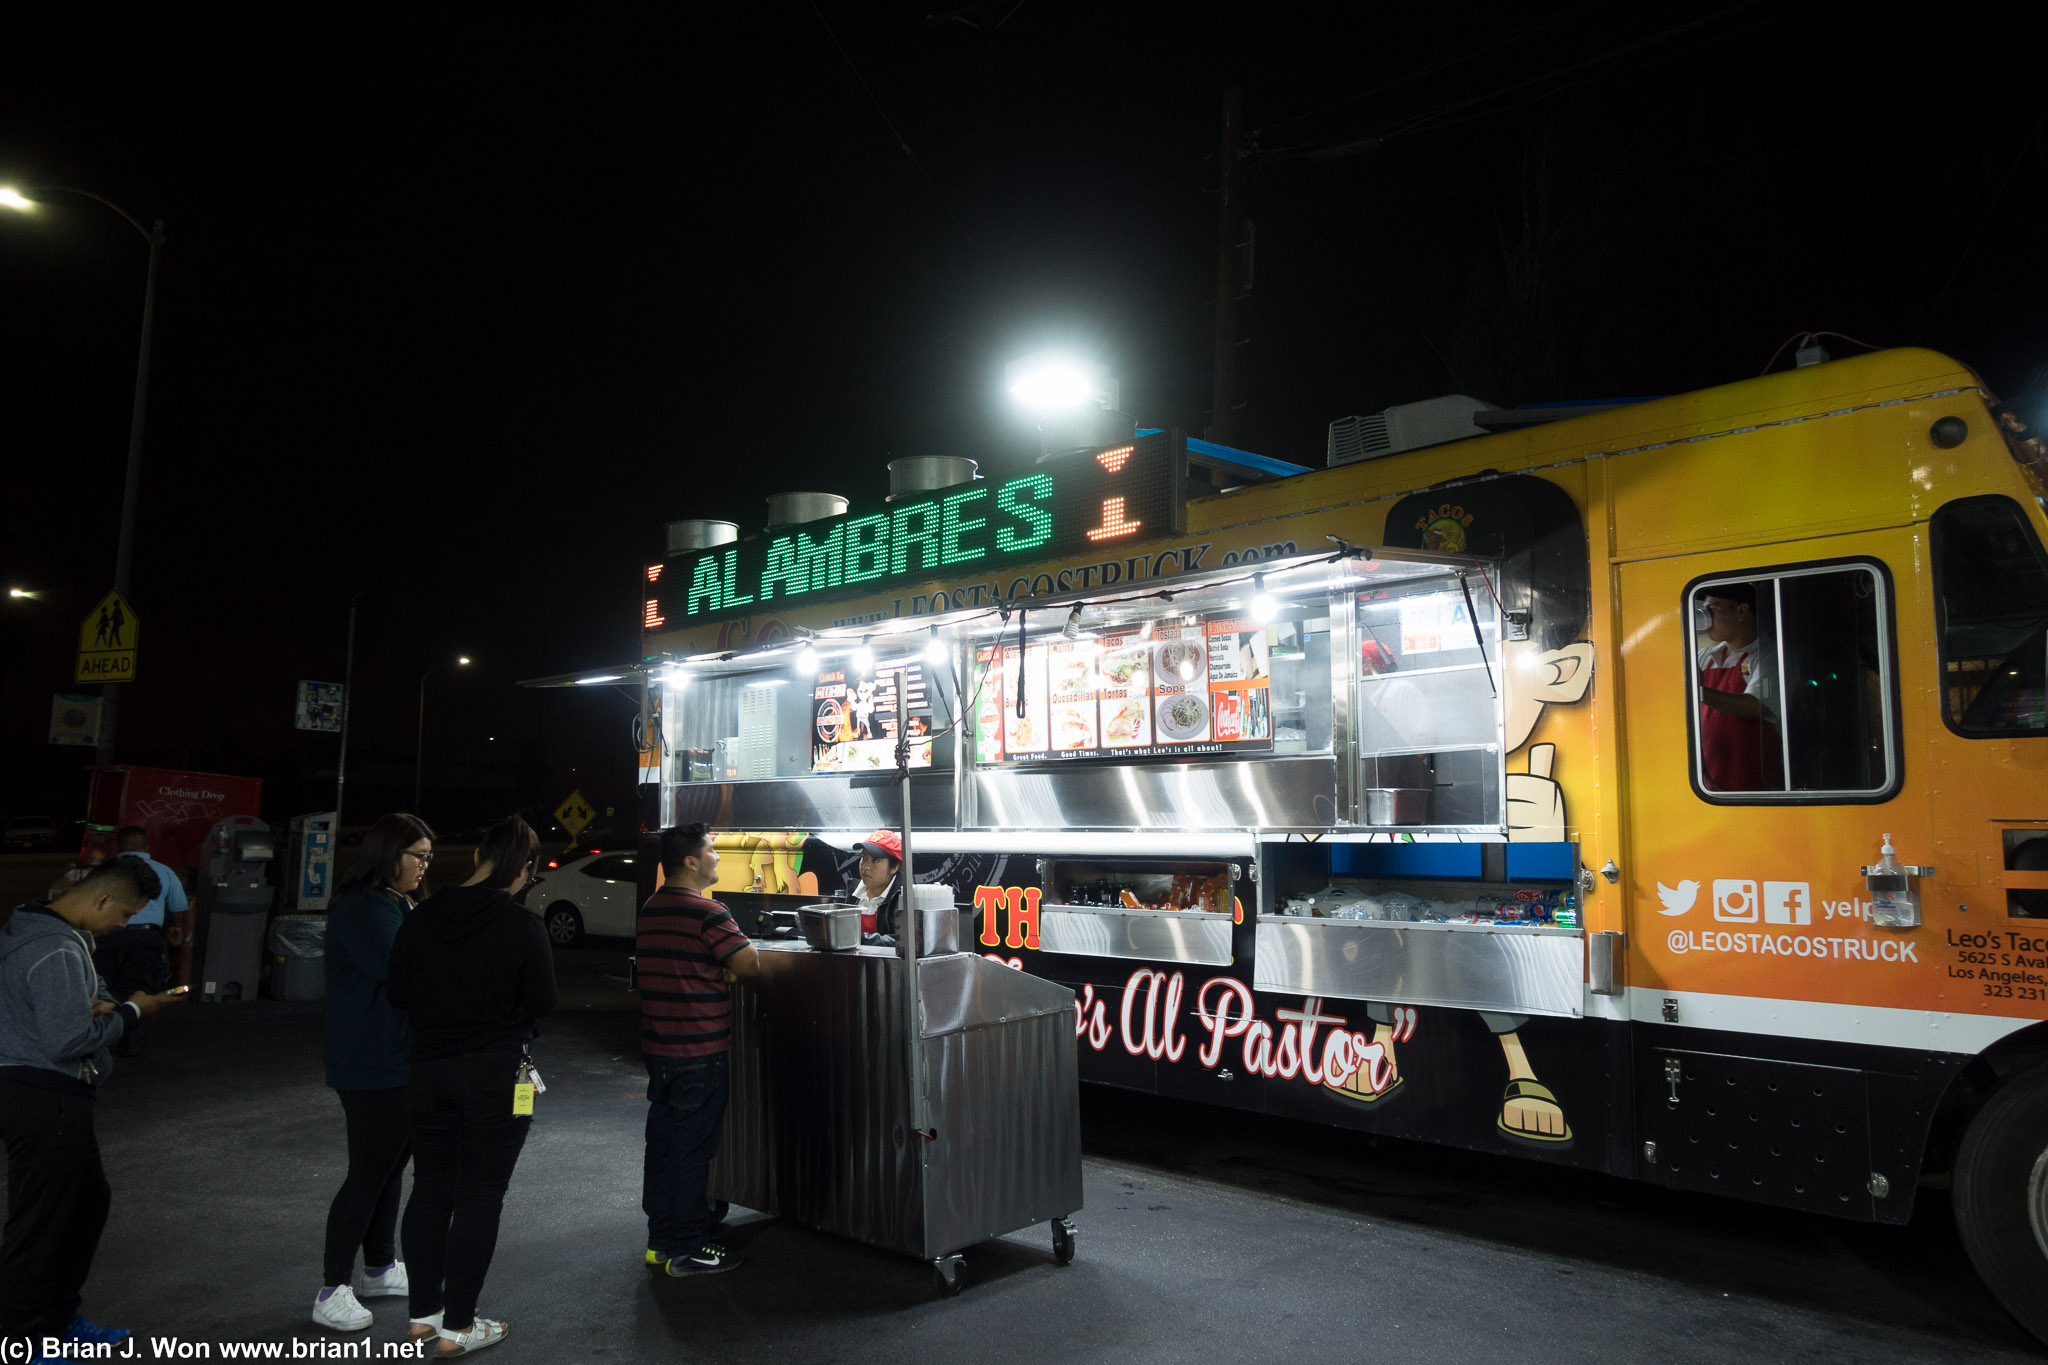 The other top-rated taco truck in LA, Leo's Tacos!